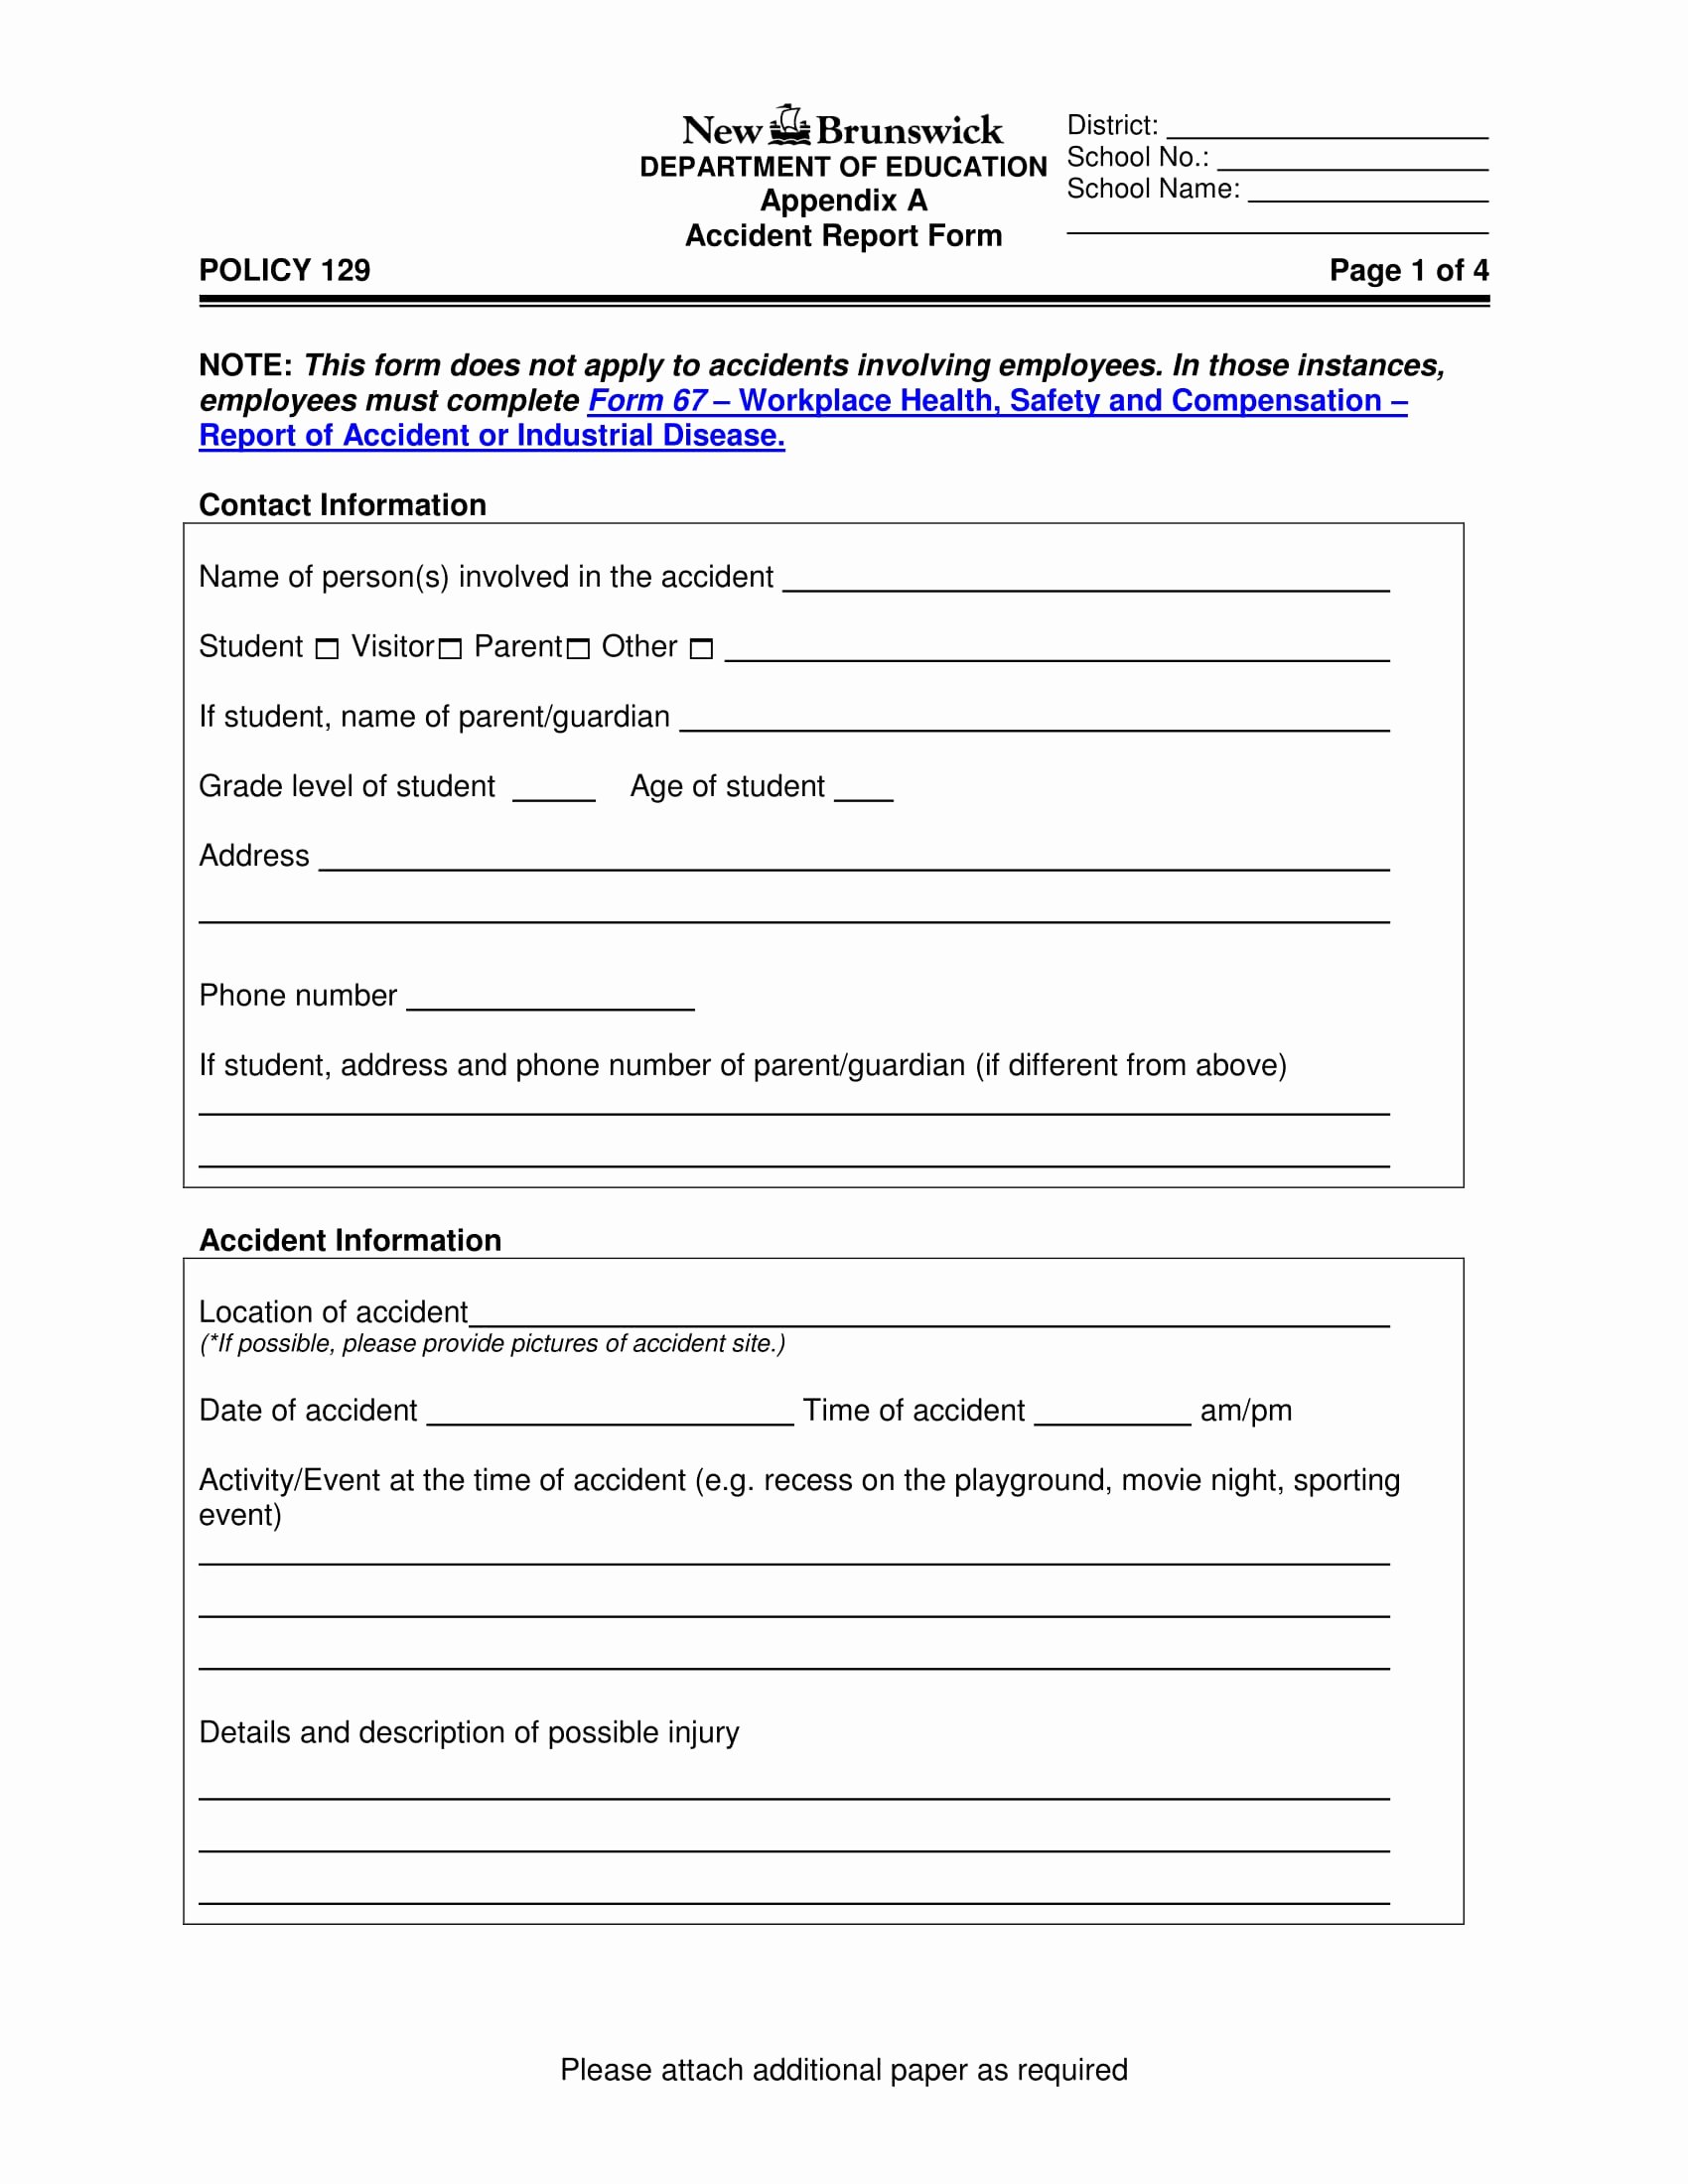 Accident Report form Inspirational 13 Accident Information forms Free Word Pdf format